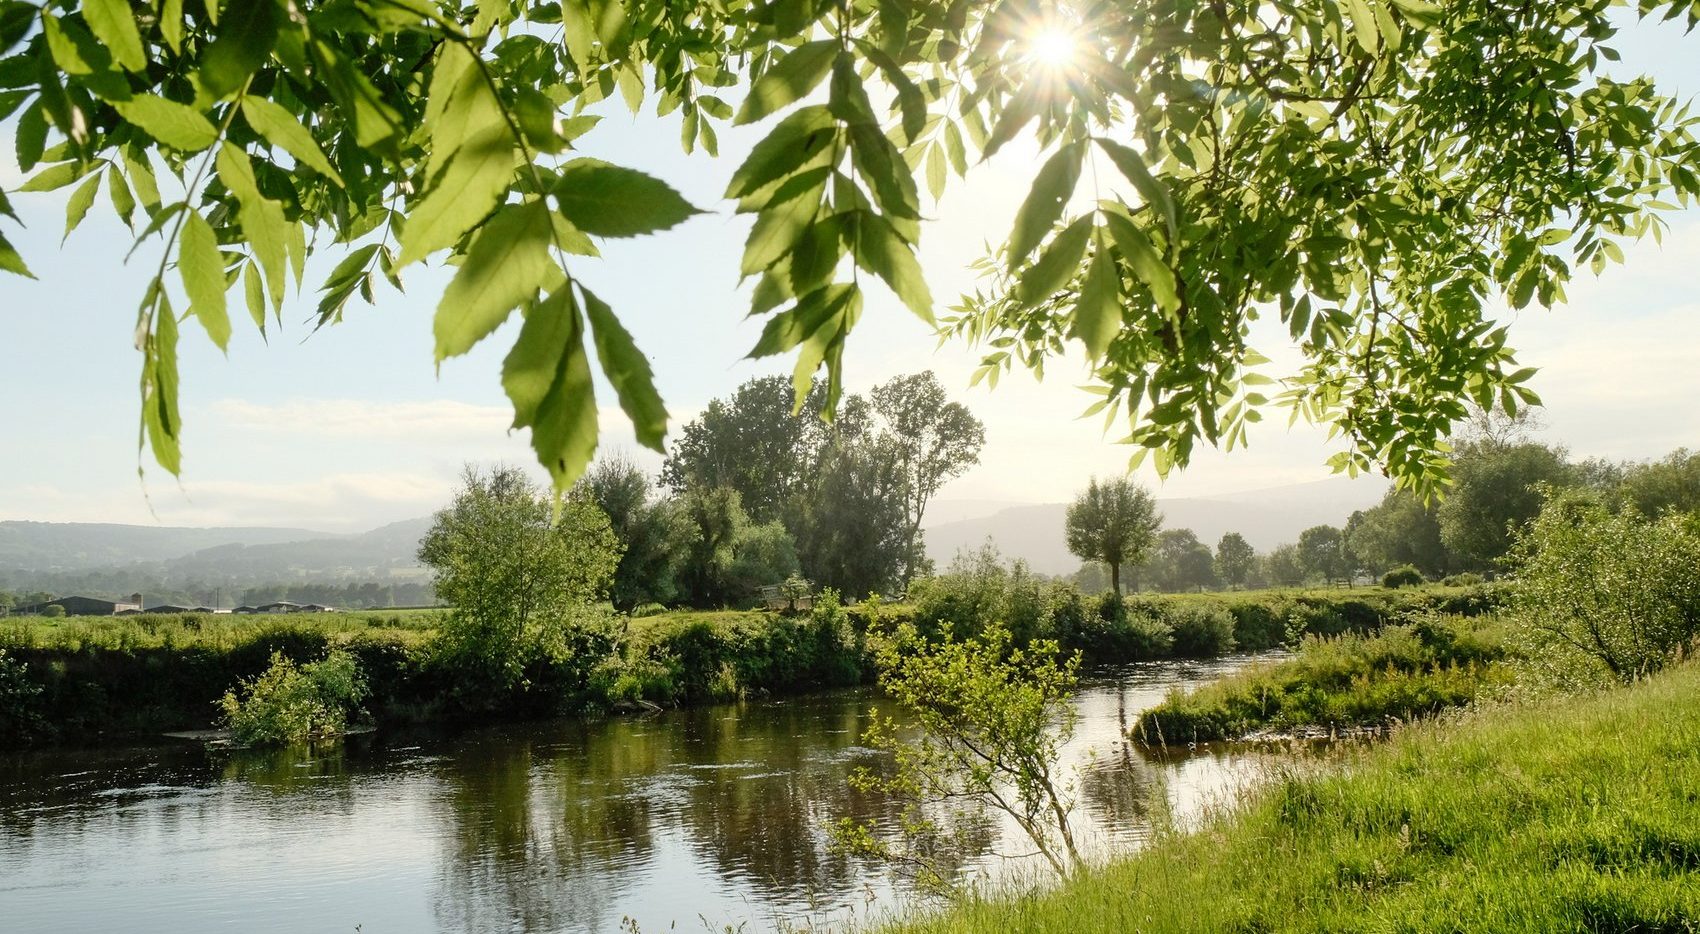 A river in summer with sun shining through overhead foliage, grassy banks and distant hills